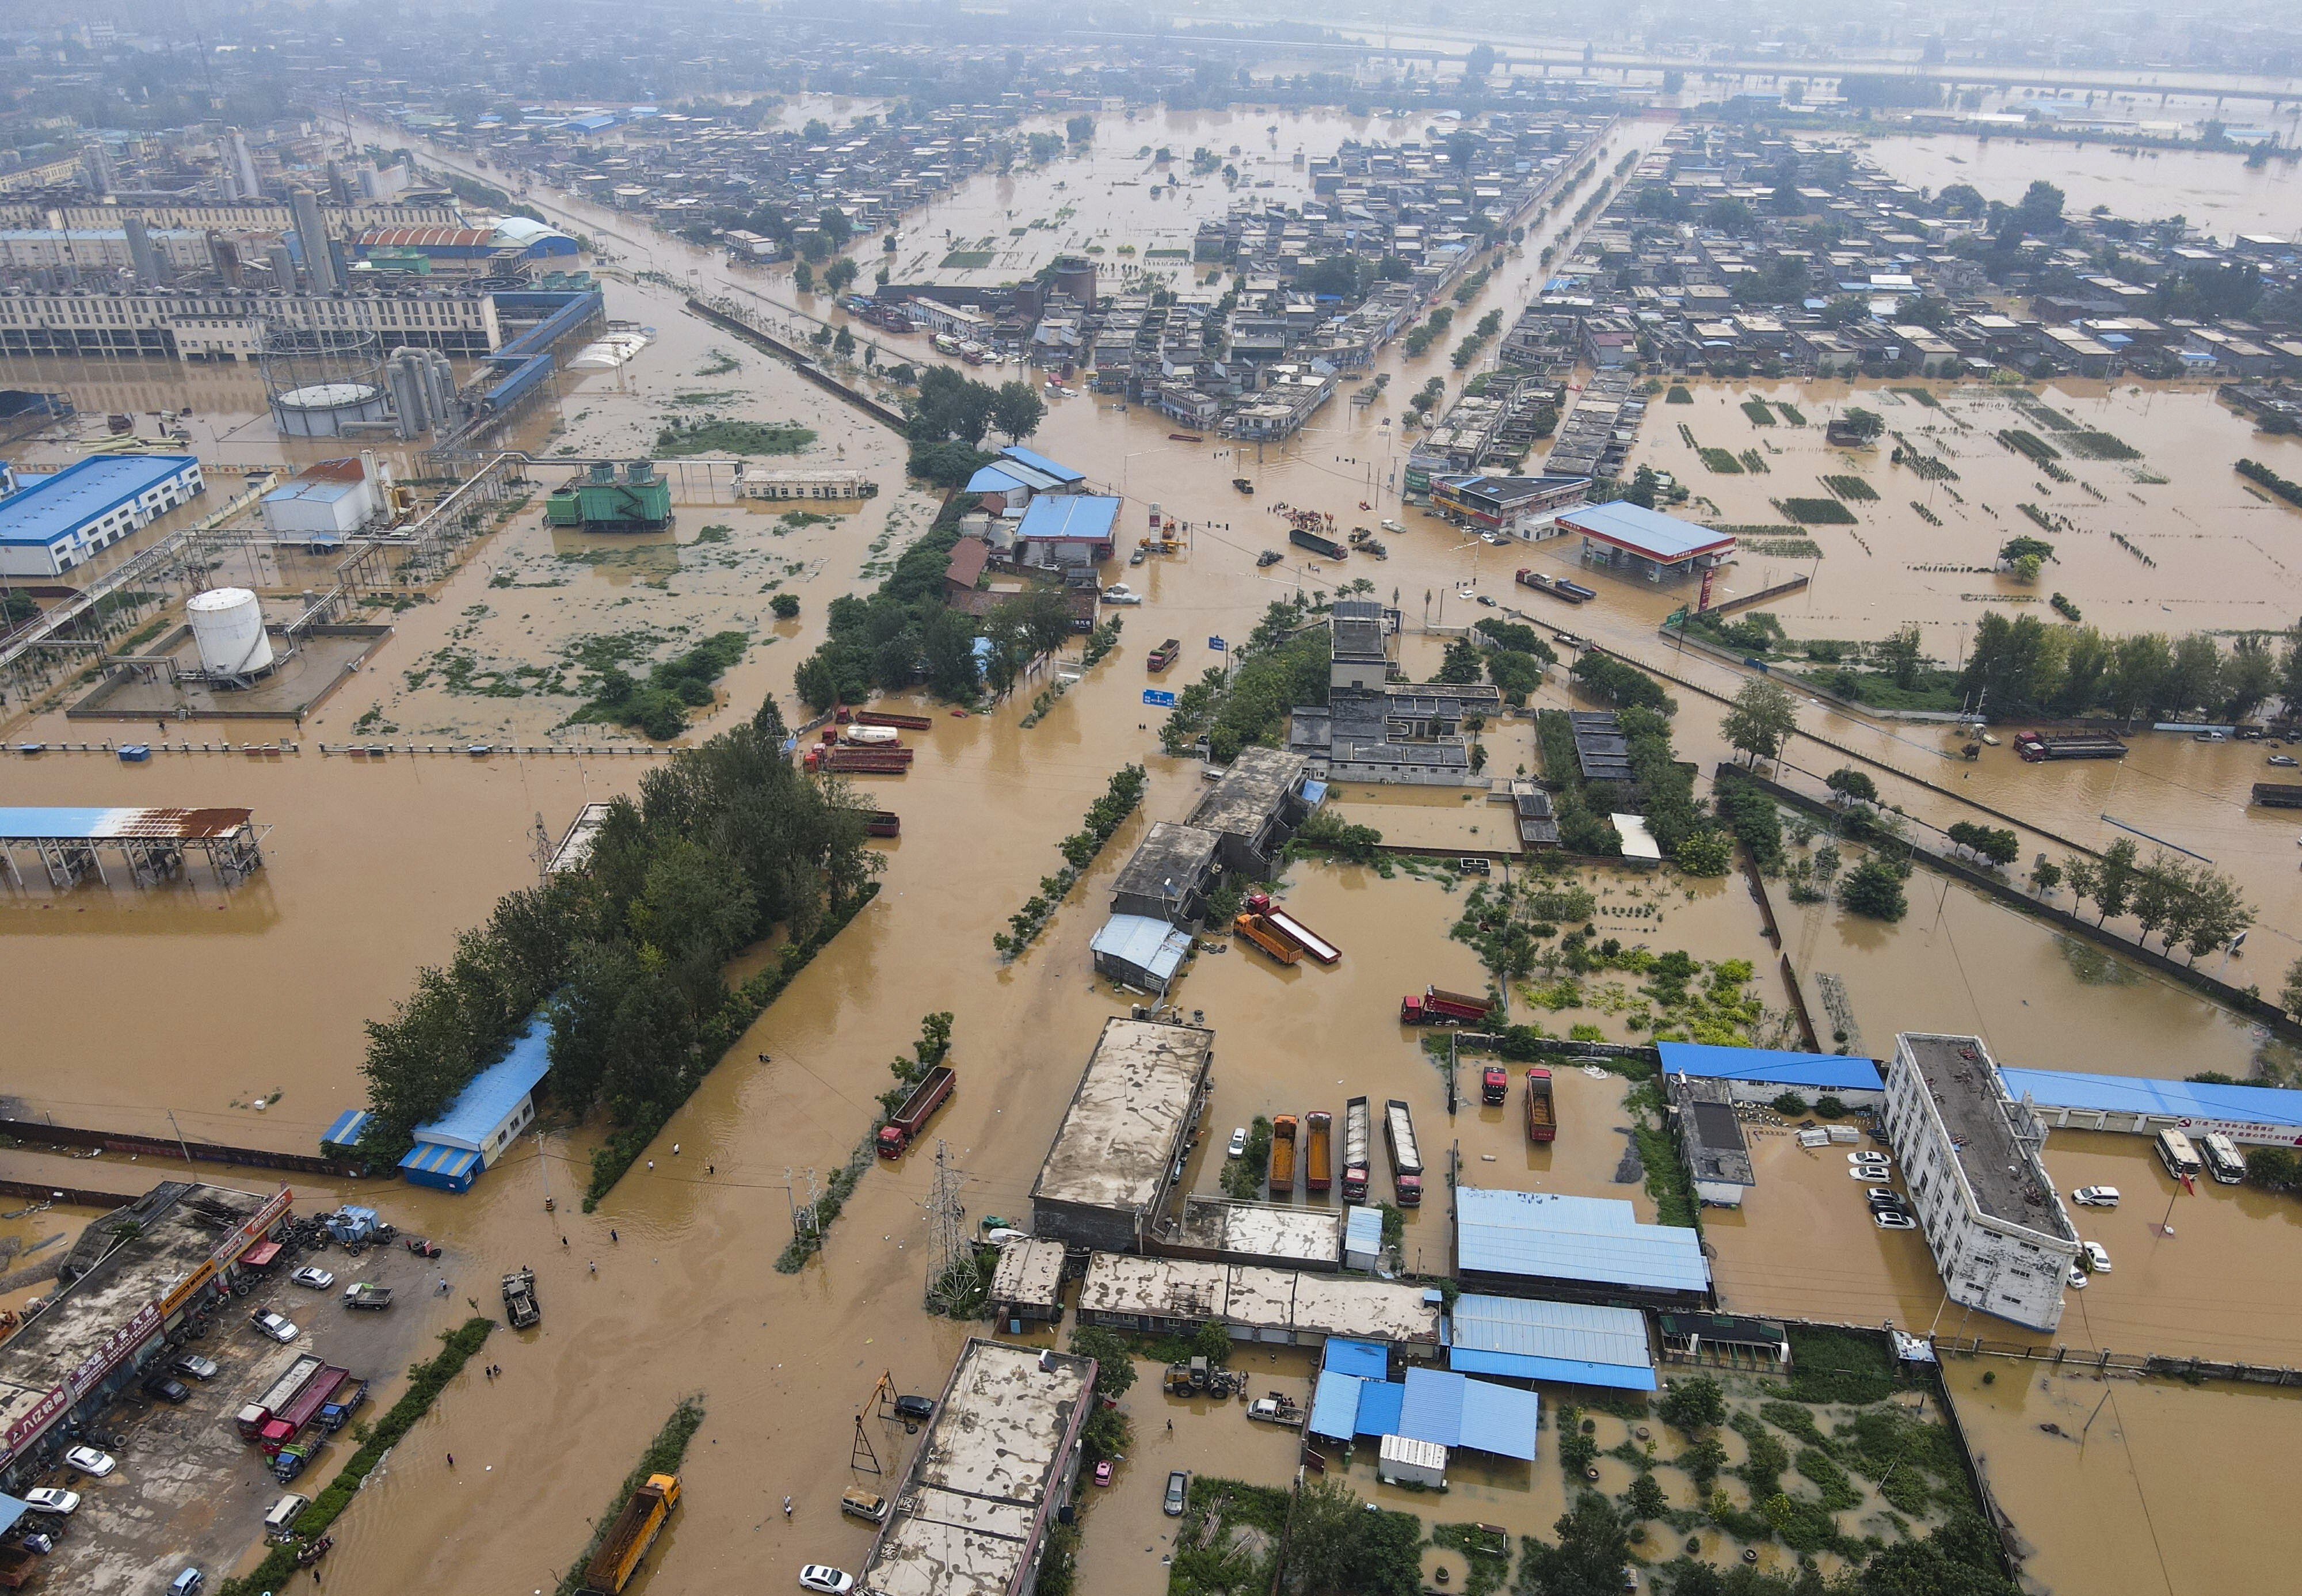 China floods: food security, inflation concerns with close to 1 million hectares affected in Henan | South China Morning Post